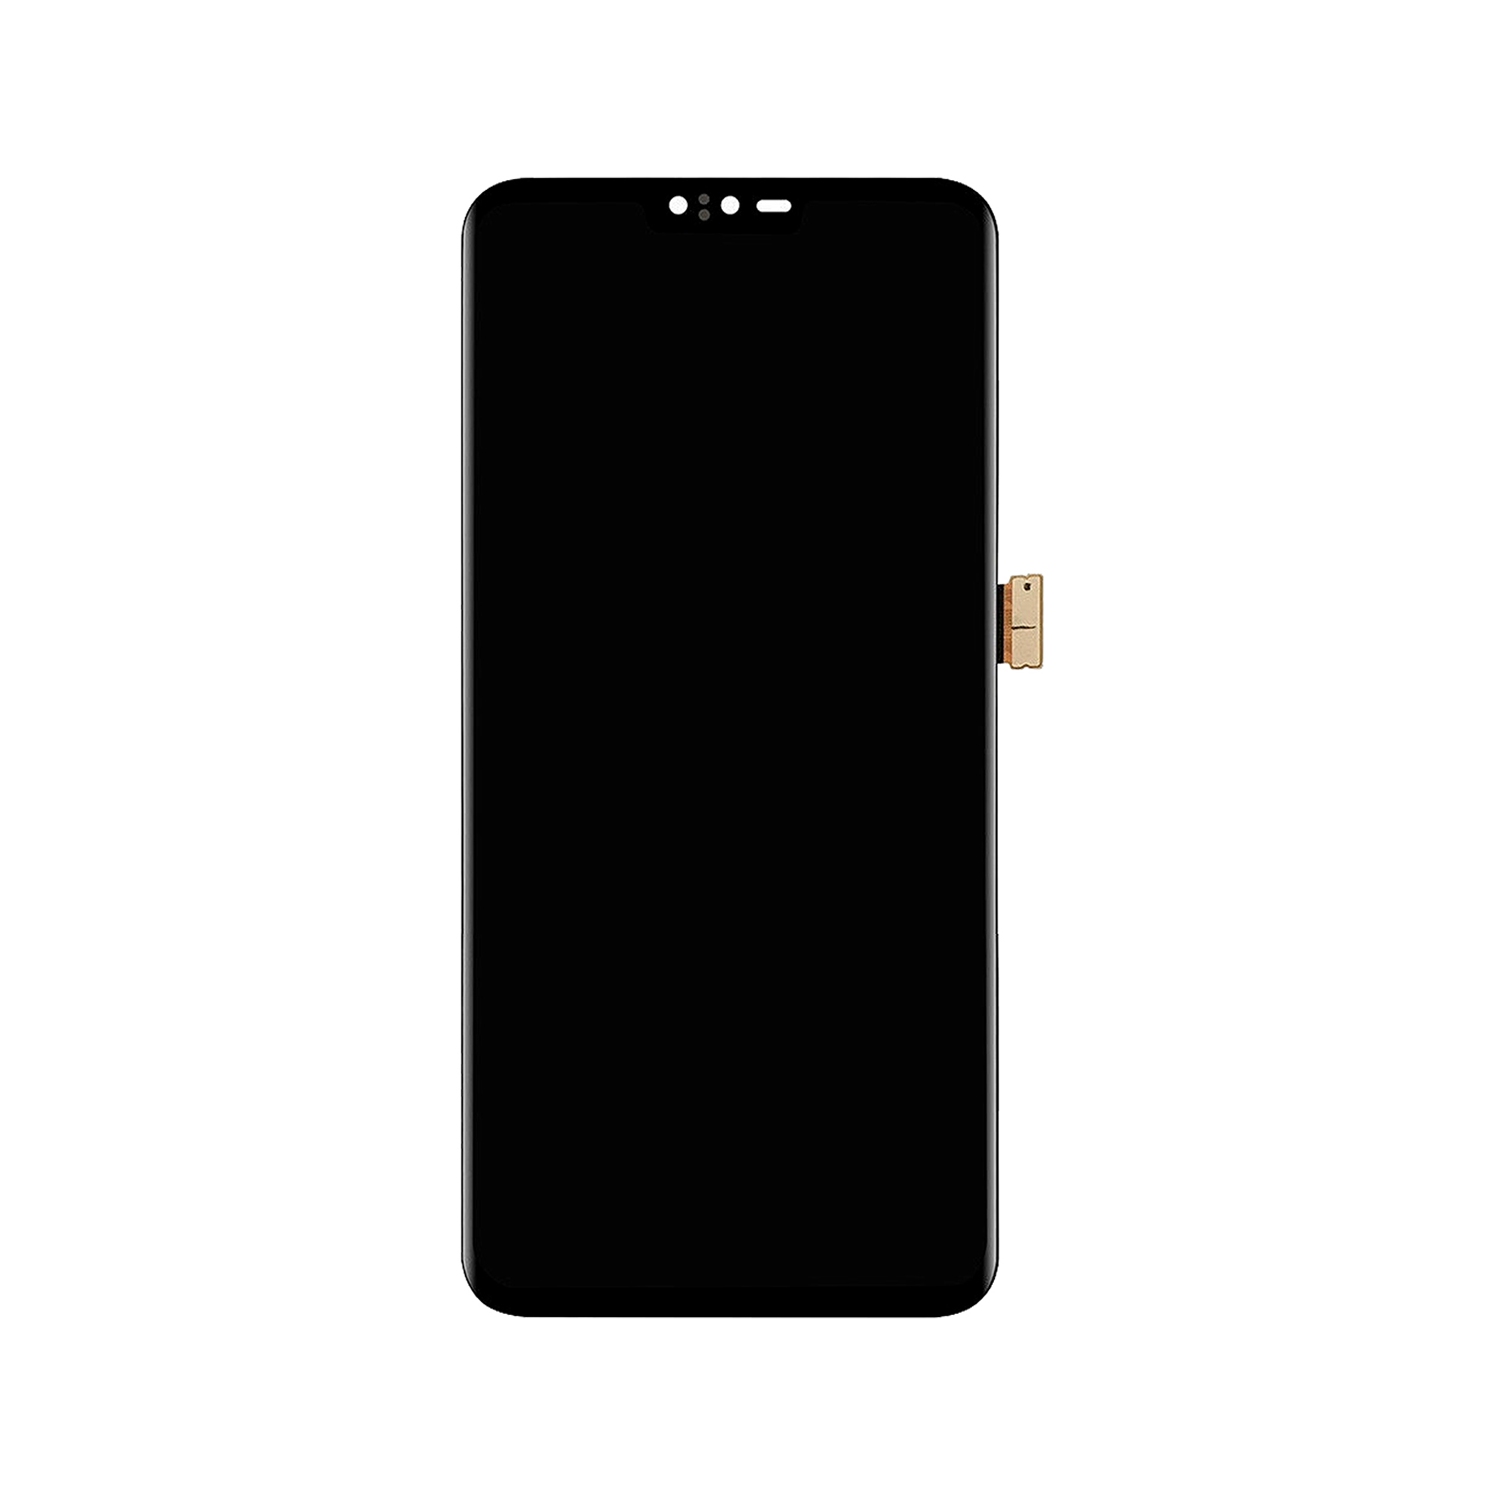 Refurbished (Excellent) - Replacement OLED Display Touch Screen Digitizer Assembly For LG V40 ThinQ / LG V50 ThinQ 5G - All Colors